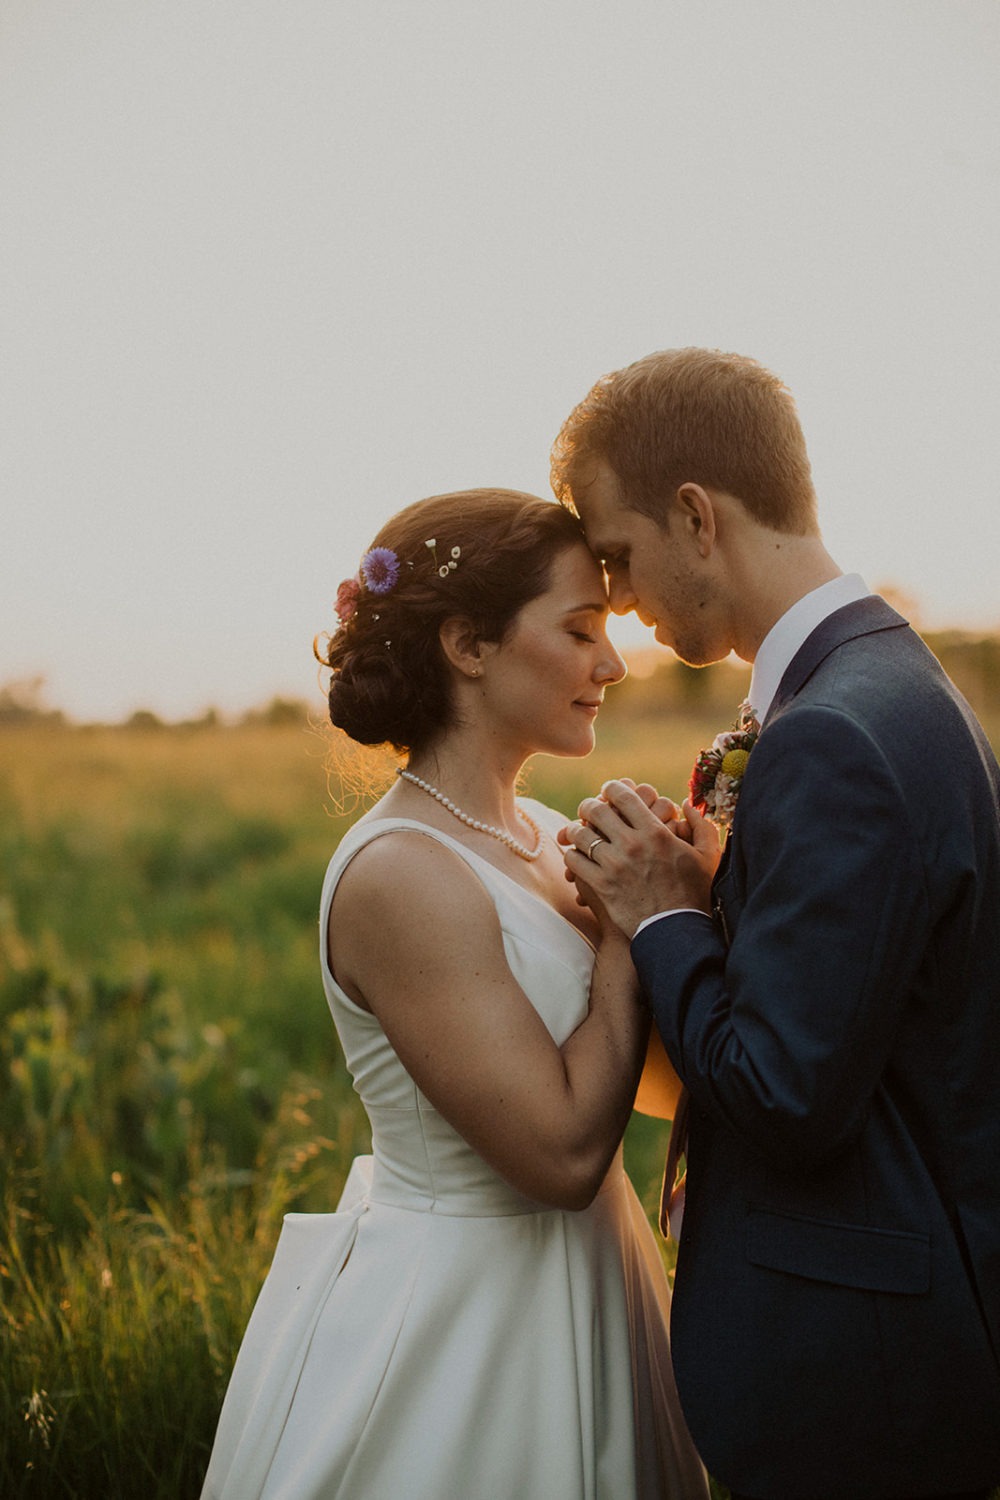 Couple embraces in a sunset field at nature wedding venue